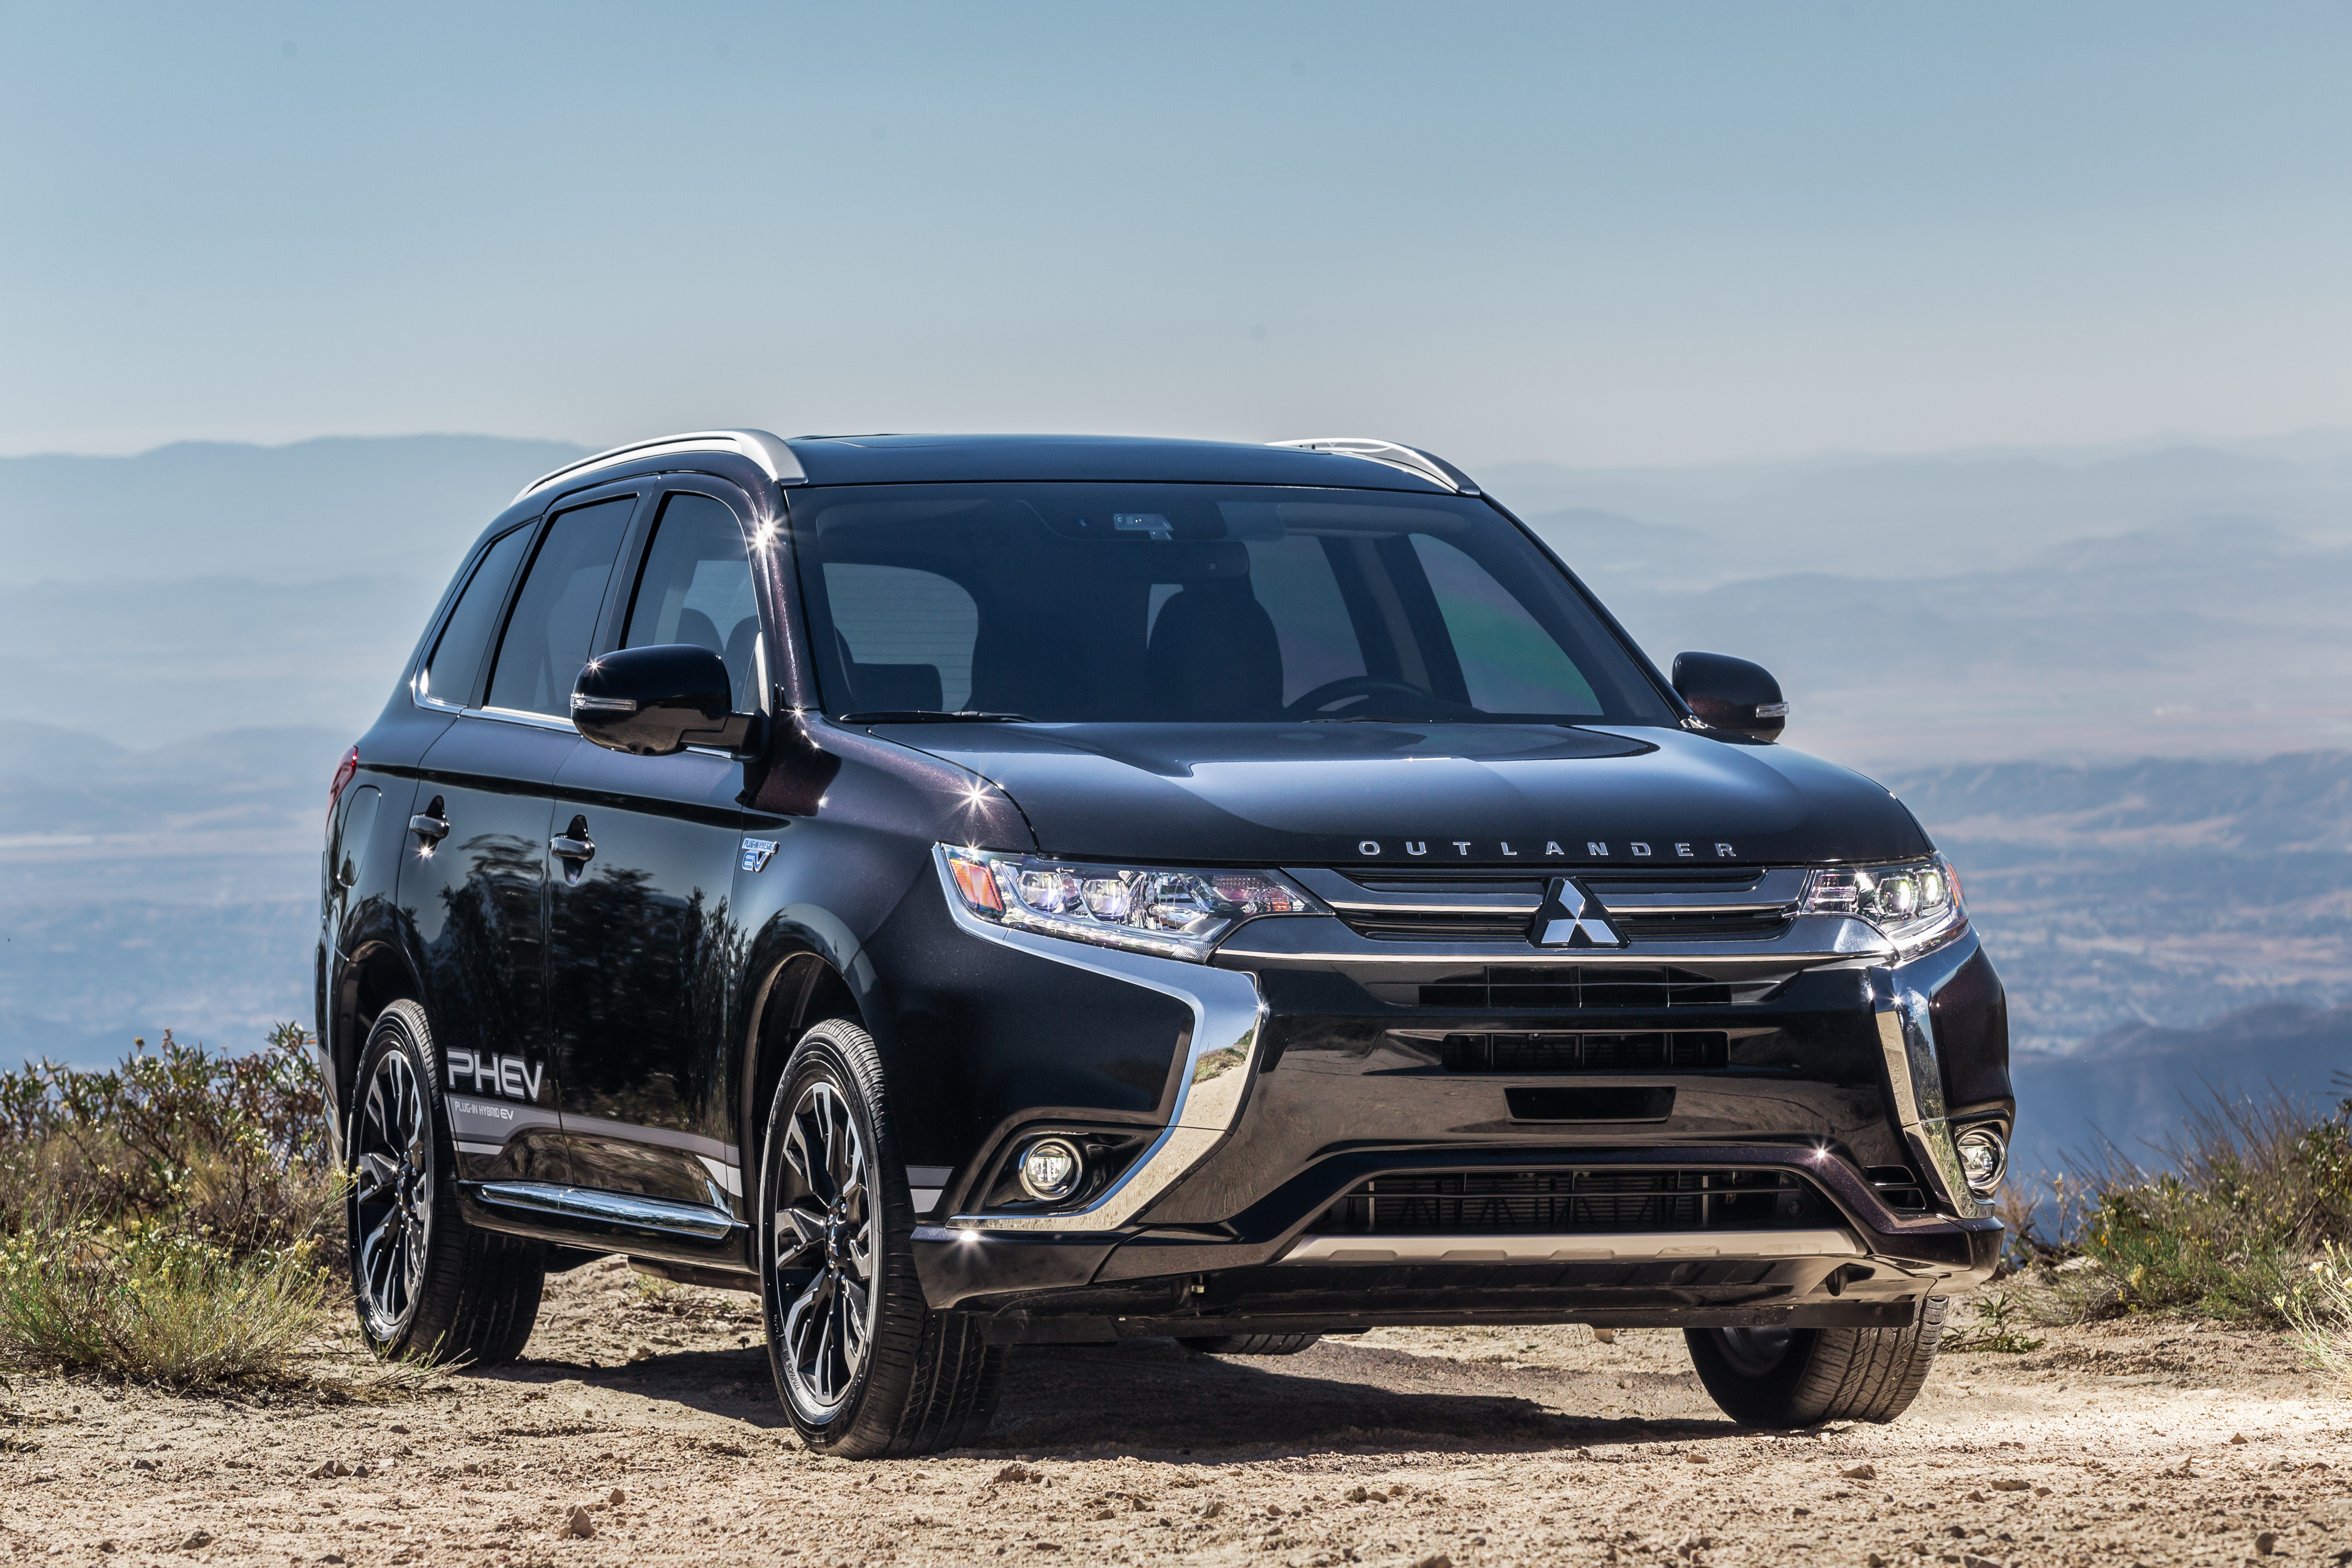 Mitsubishi Outlander PHEV Named Green Car Journal's 2019 Green SUV of the  Year™ | Business Wire